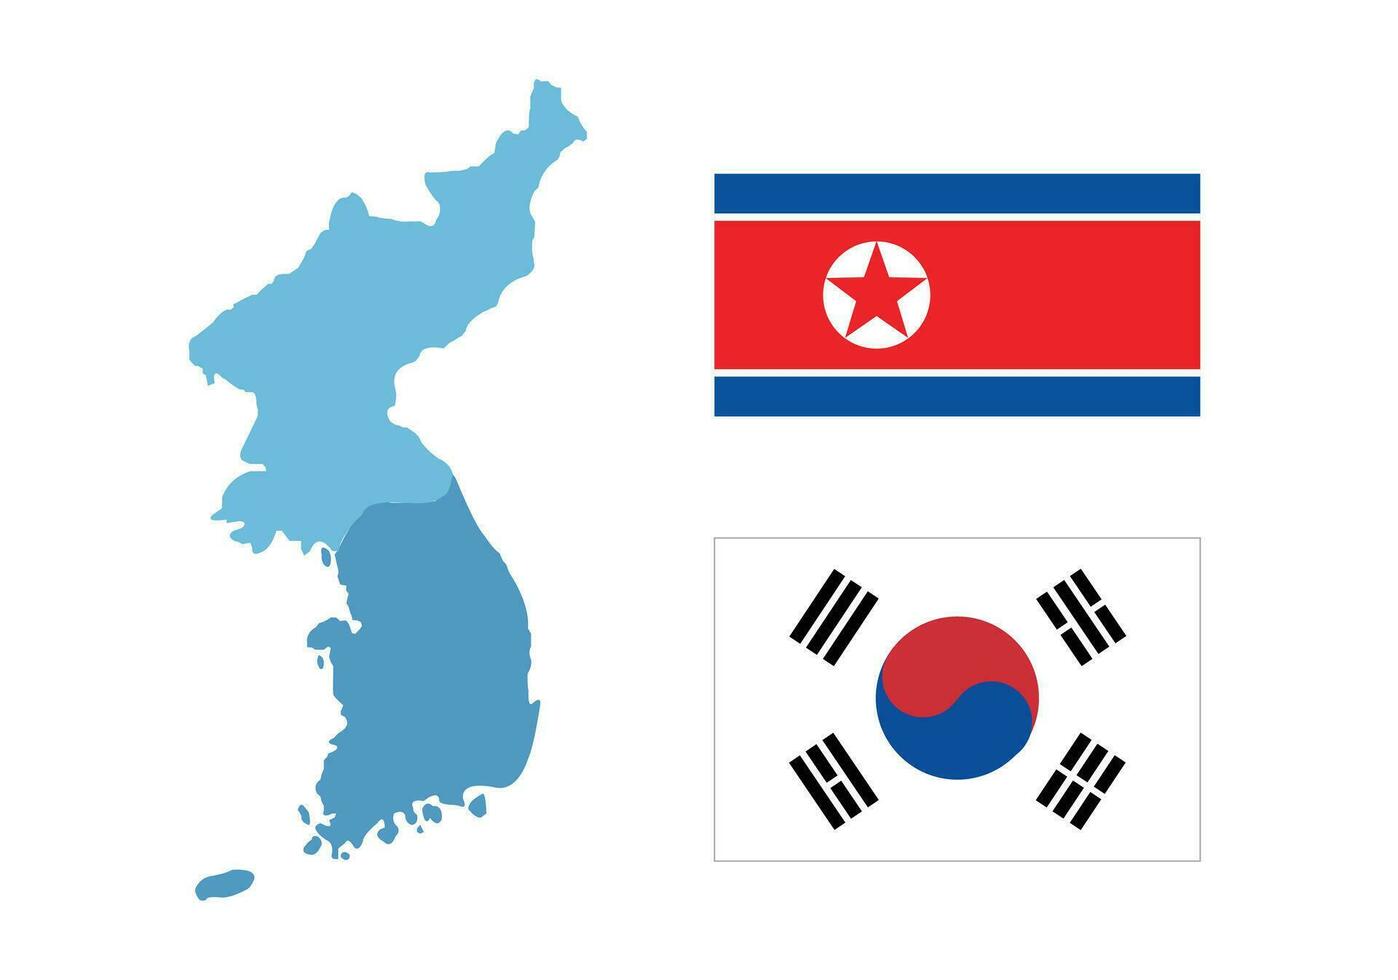 North korea and South korea country map and flag, vector illustration.